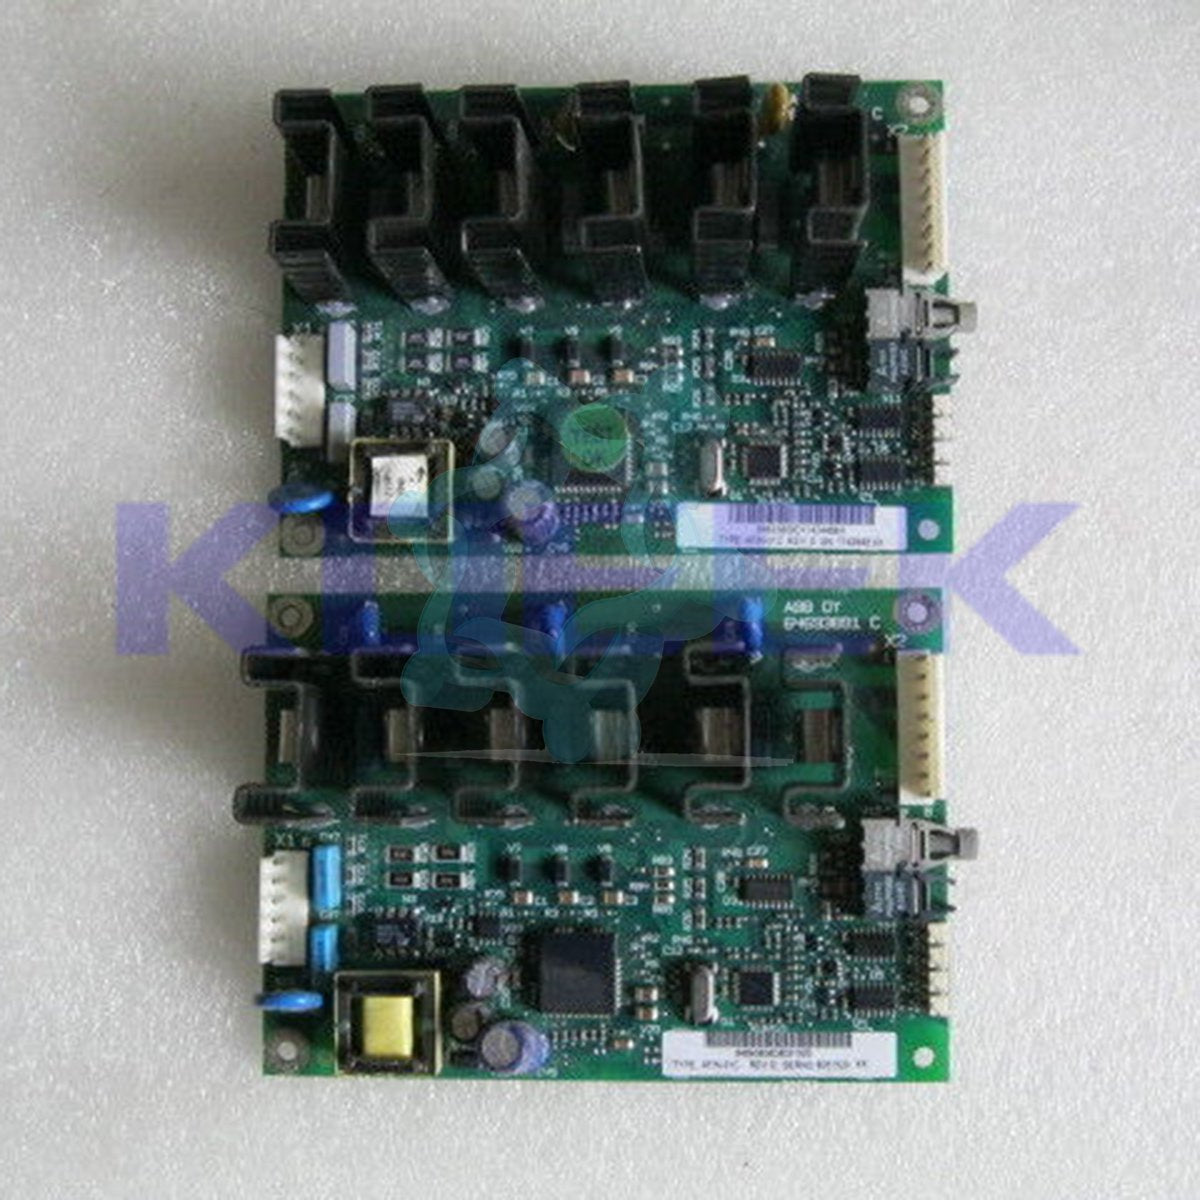 AFIN-01C KOEED 201-500, 80%, ABB, import_2020_10_10_031751, Other